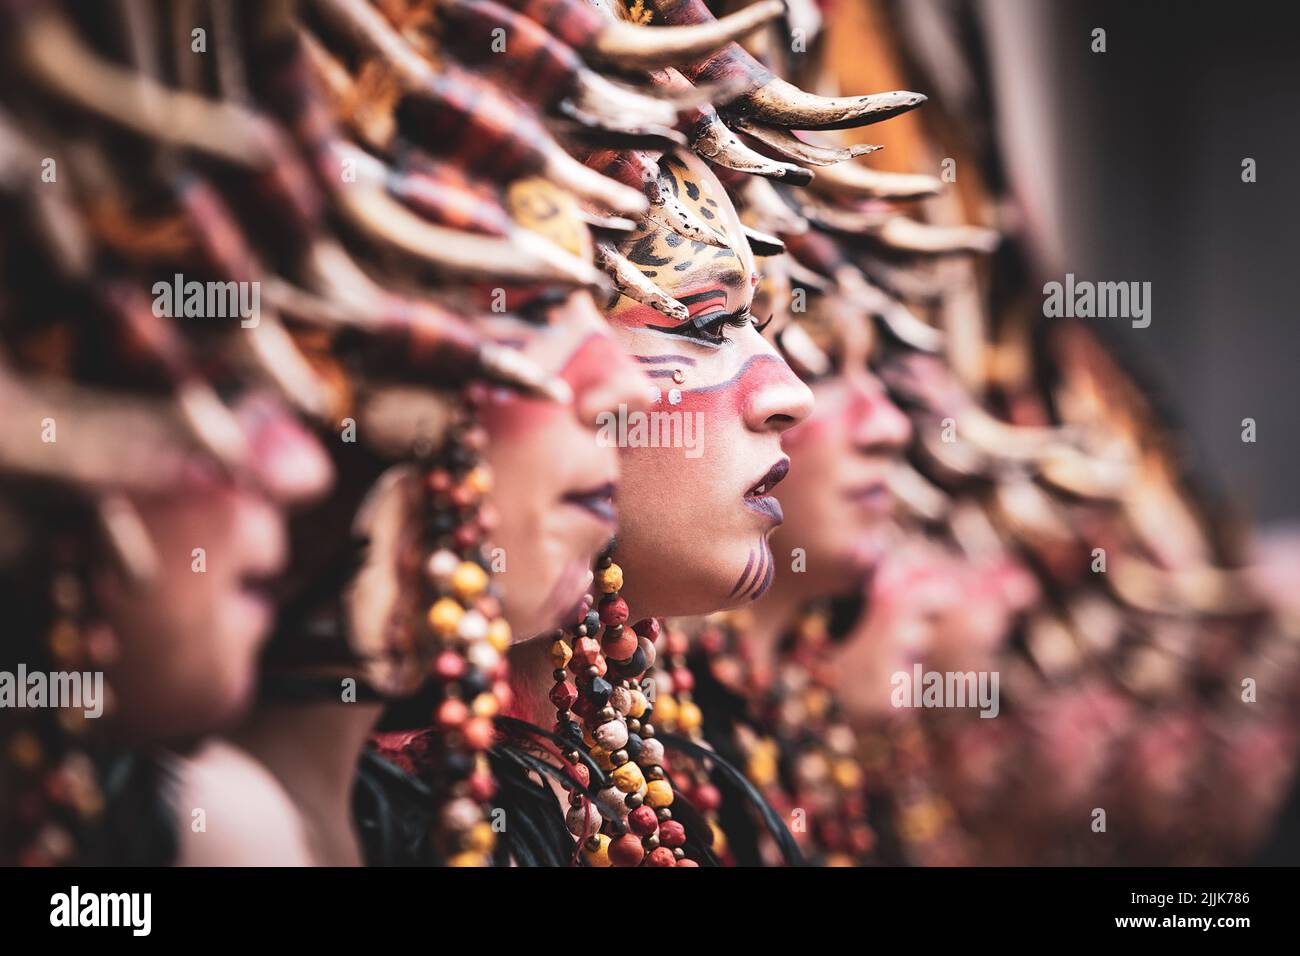 A perspective shot of some women at the festival of international tourist interest in Almansa. Stock Photo